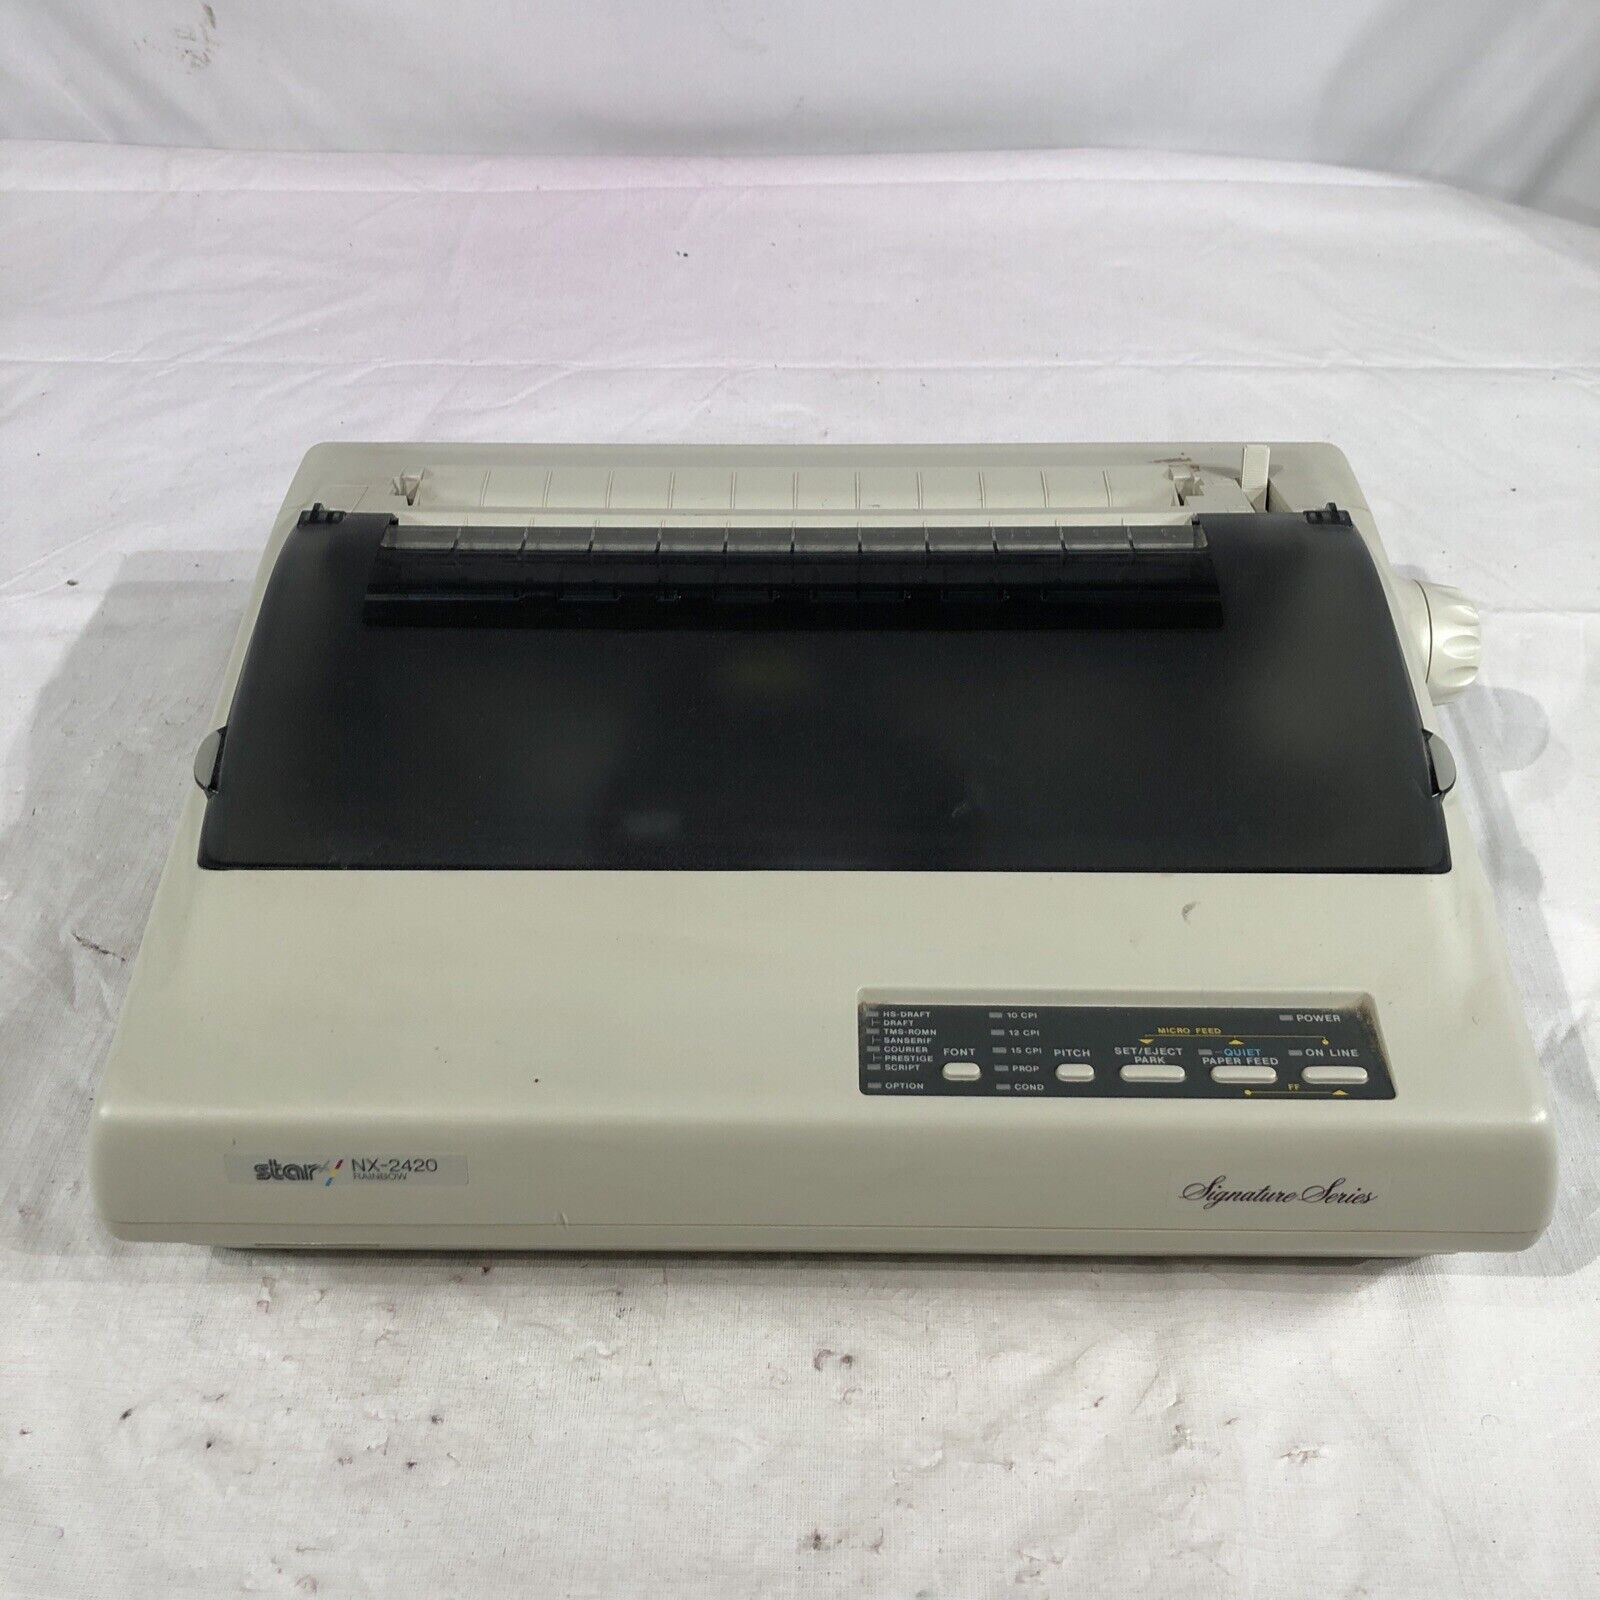 STAR NX-1020 Rainbow Pin Dot Matrix Printer SOLD AS-IS Seems To Be Working